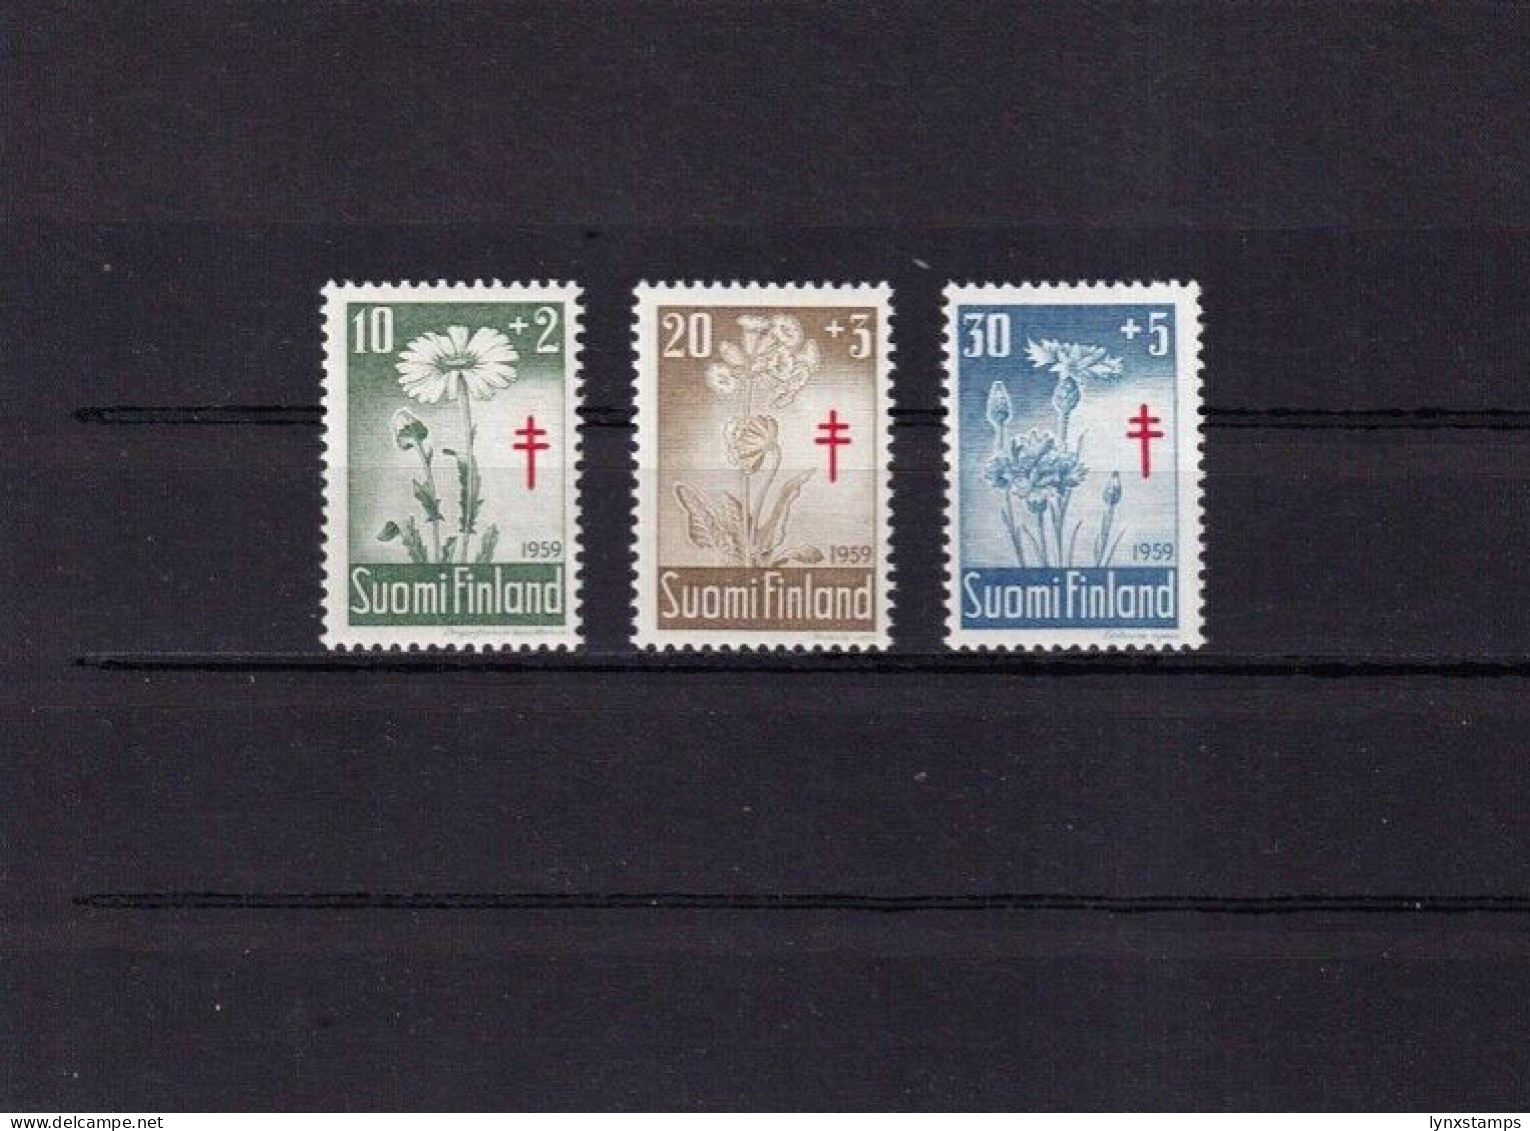 G022 Finland 1959 The Prevention Of Tuberculosis - Flowers CV$10 - Unused Stamps